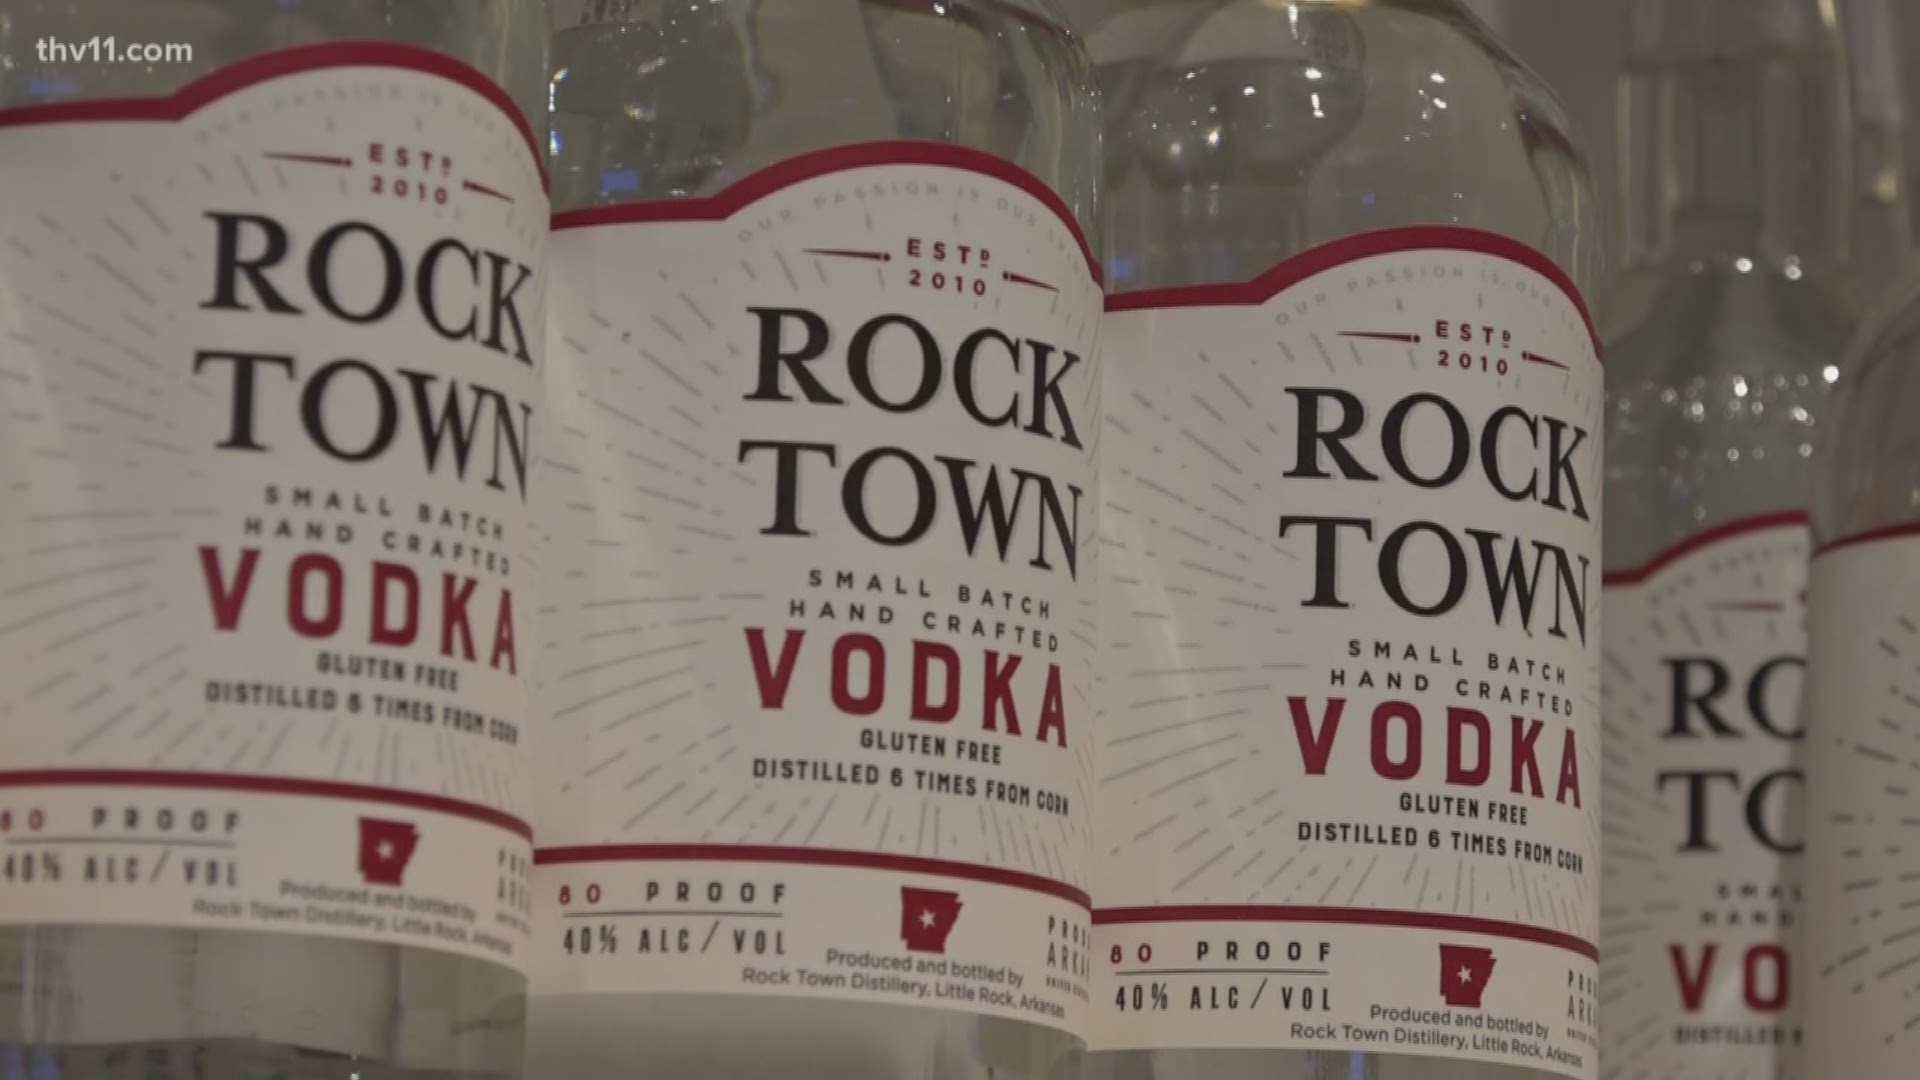 Rock Town Distillery in Little Rock is using its "high proof spirits" to make free hand sanitizer for the public to use during the coronavirus pandemic.